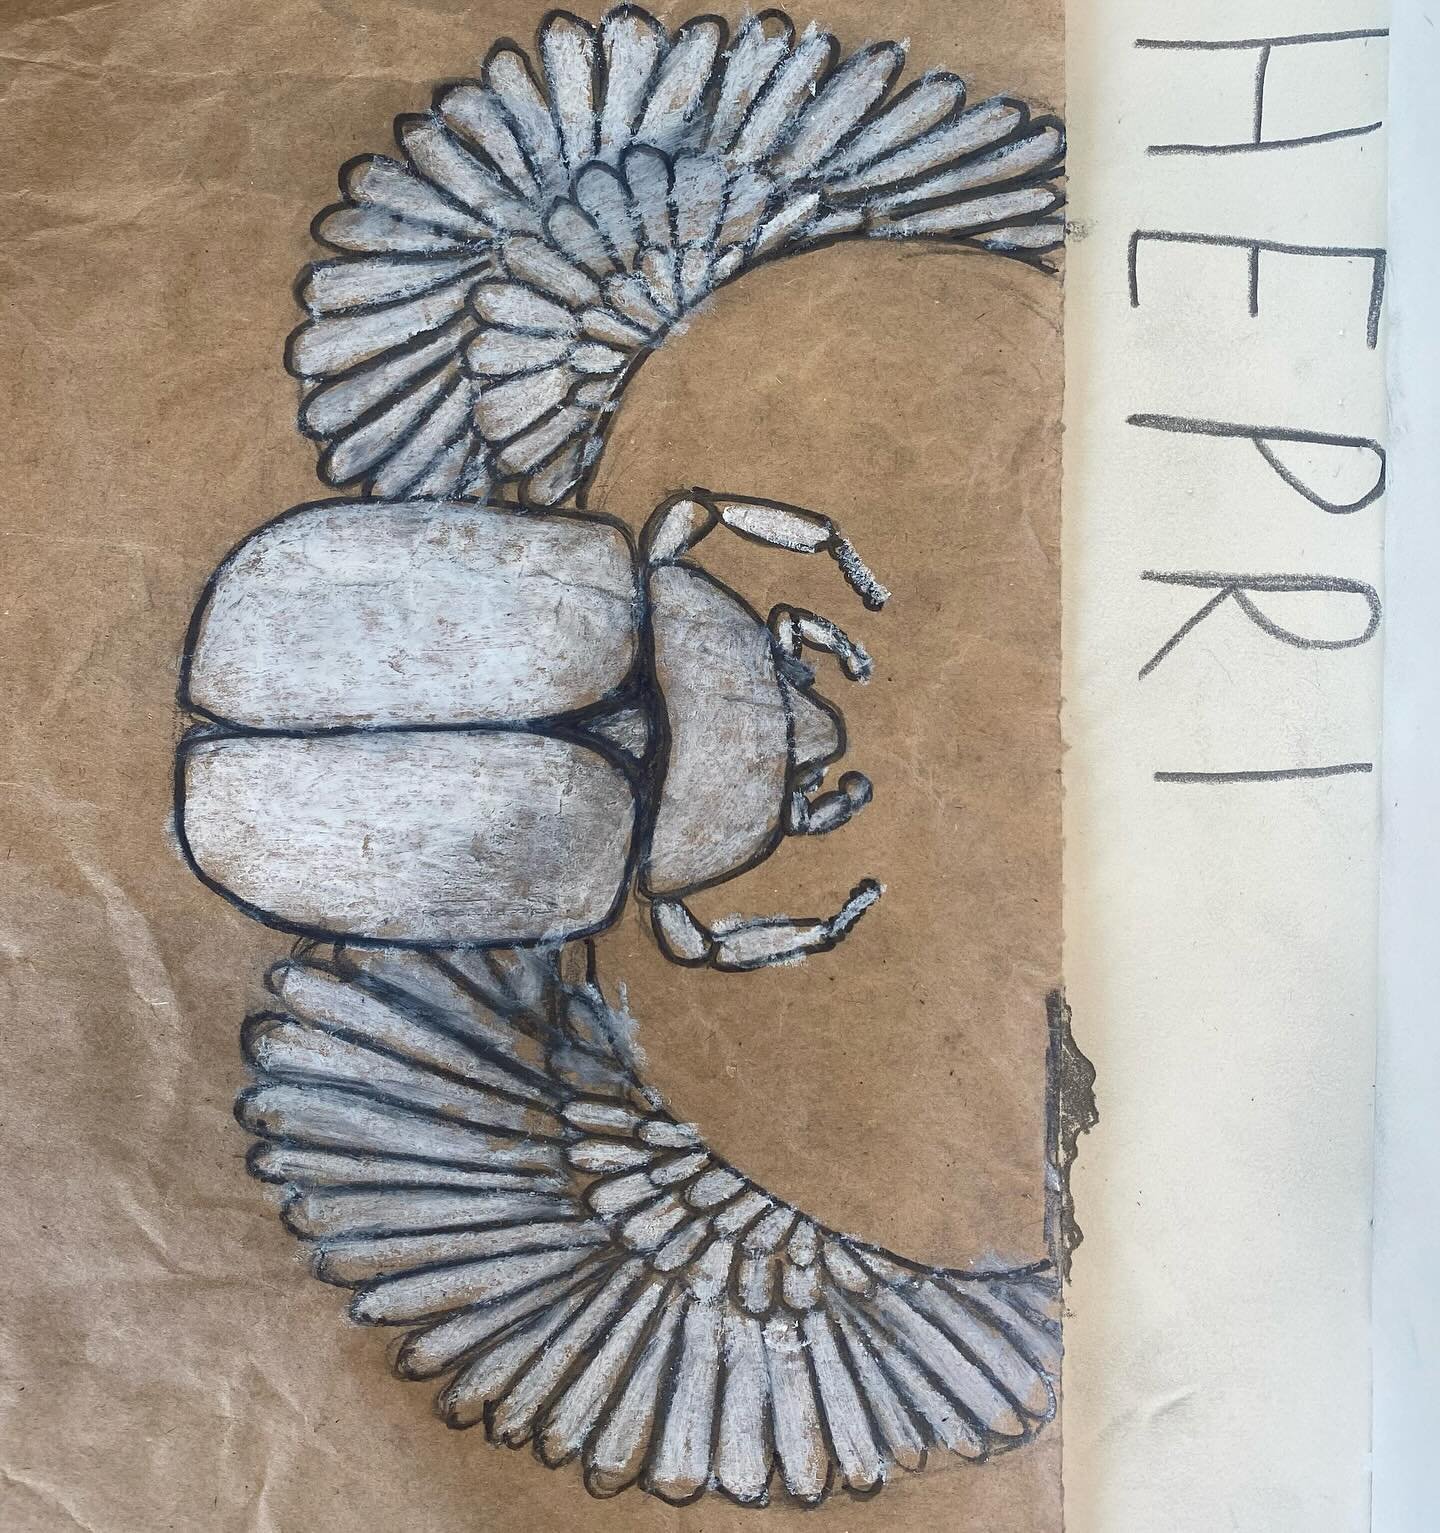 FABULOUS class today in MMC. Our mythical creature this week was based on the real life beetle the SCARAB. Keeping the theme with our M+P classes on bugs, this little, mighty bug was the inspiration for Khepri, the ancient Egyptian God of the Morning